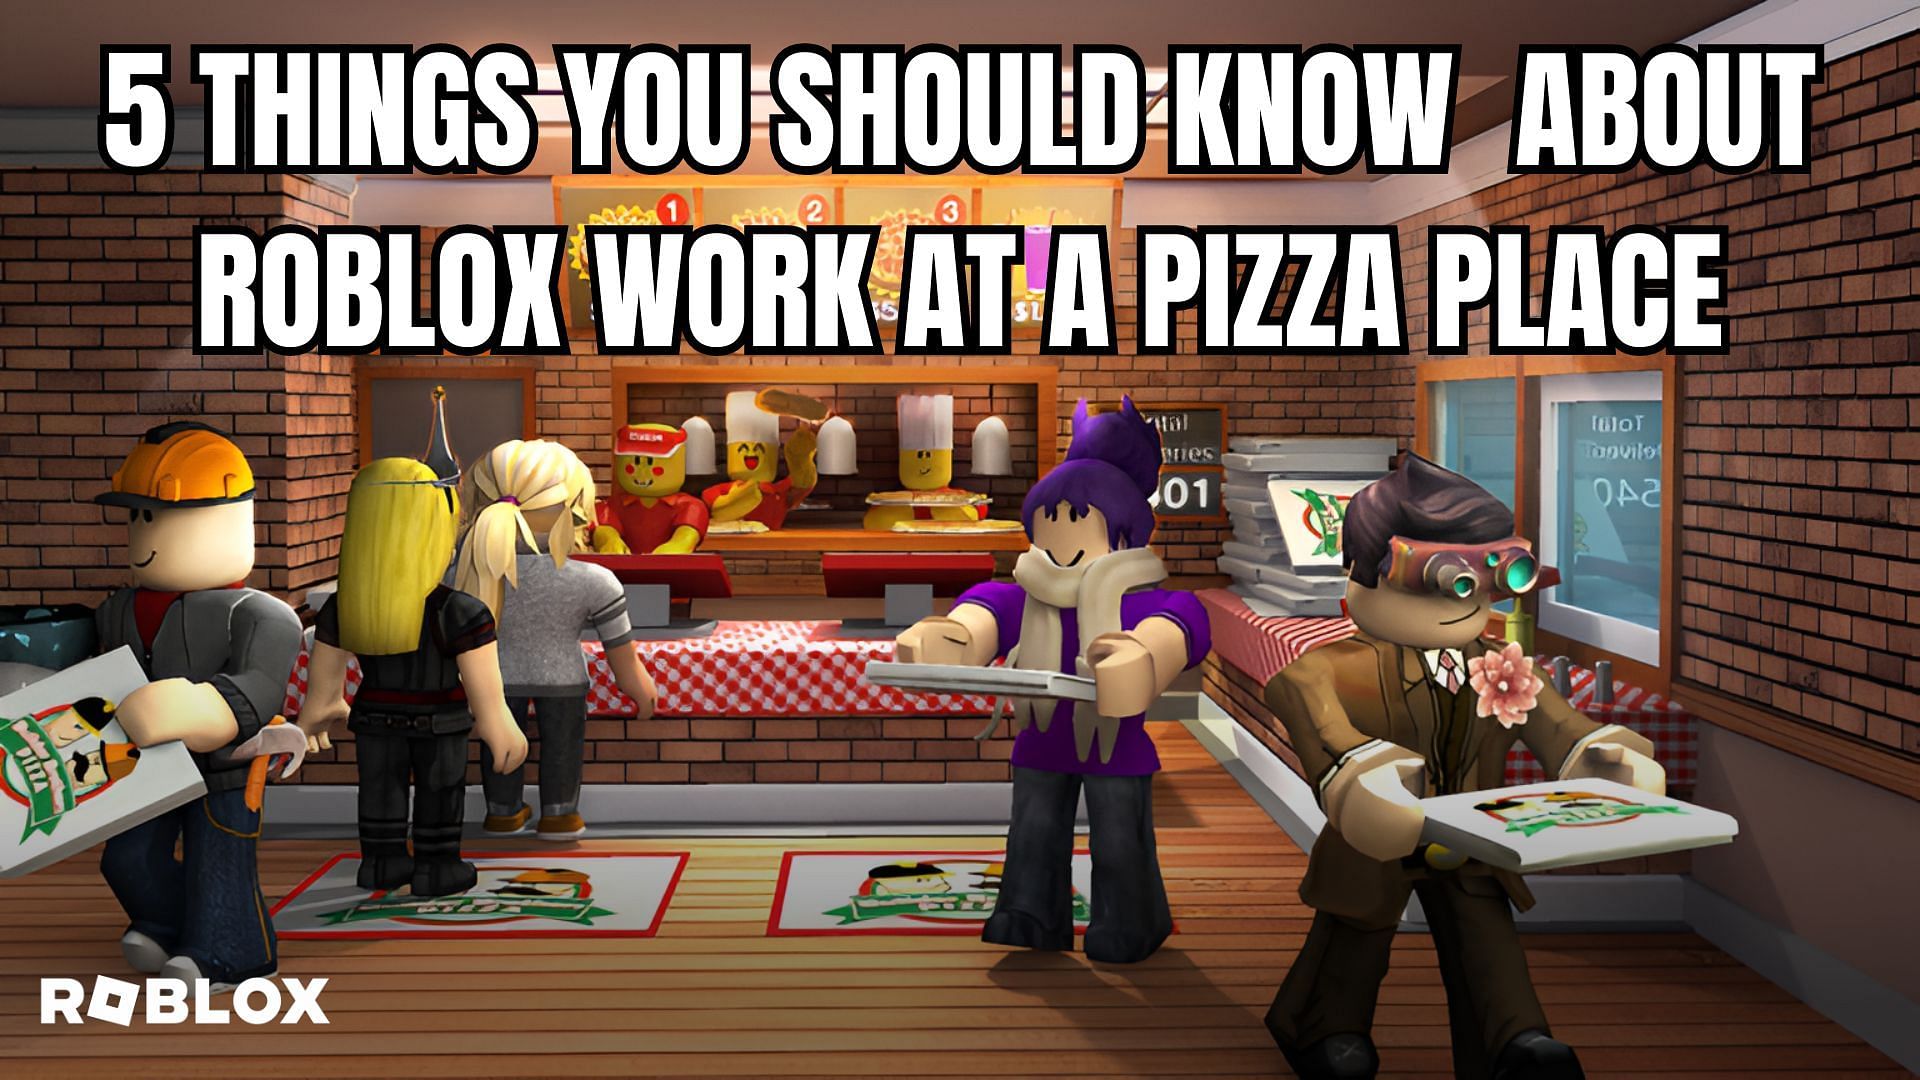 WORKING AT A PIZZA PLACE!!